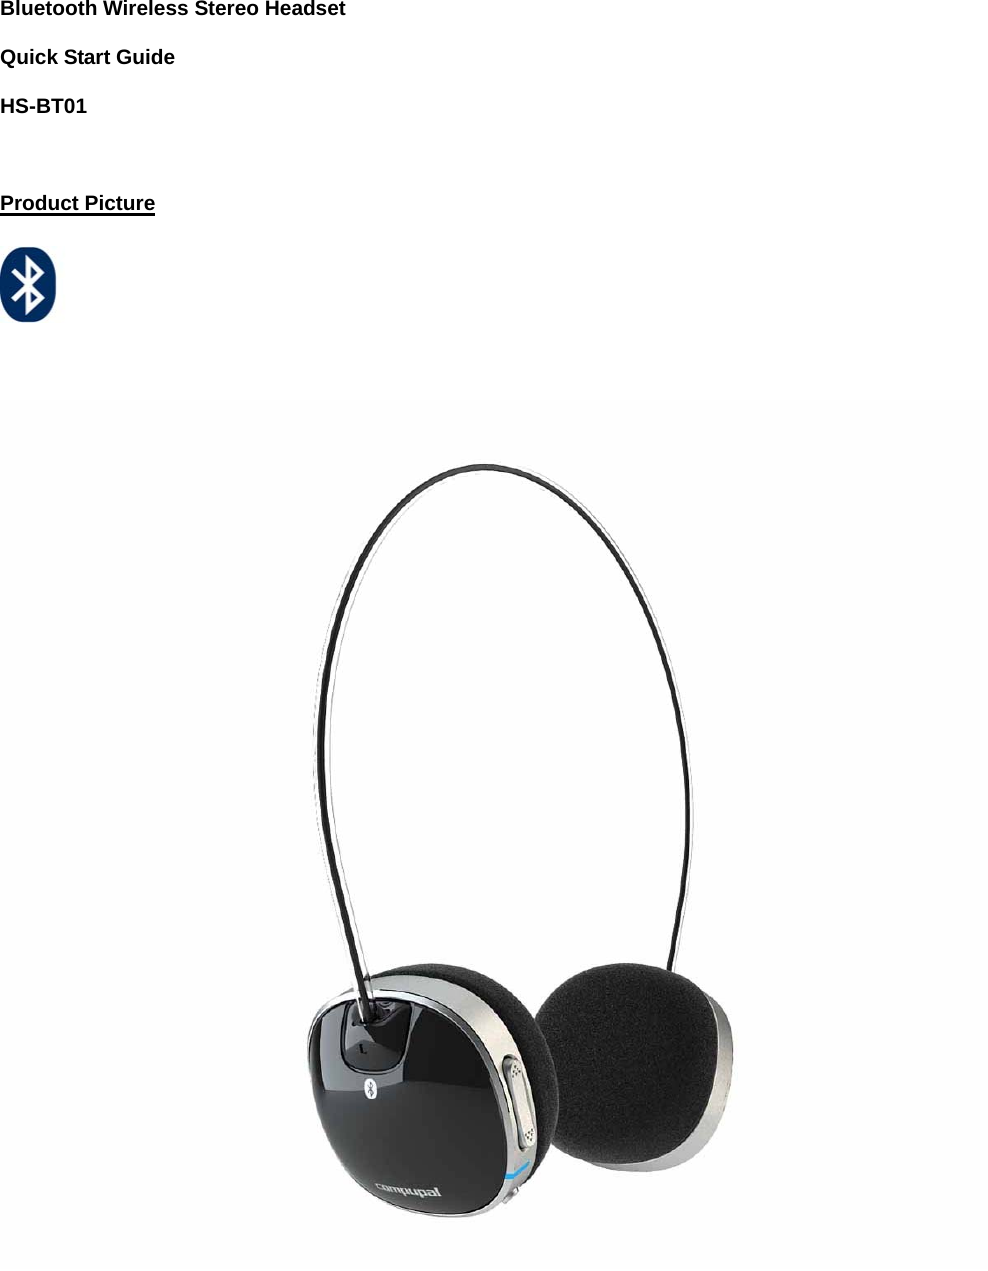 Bluetooth Wireless Stereo Headset Quick Start Guide HS-BT01  Product Picture    